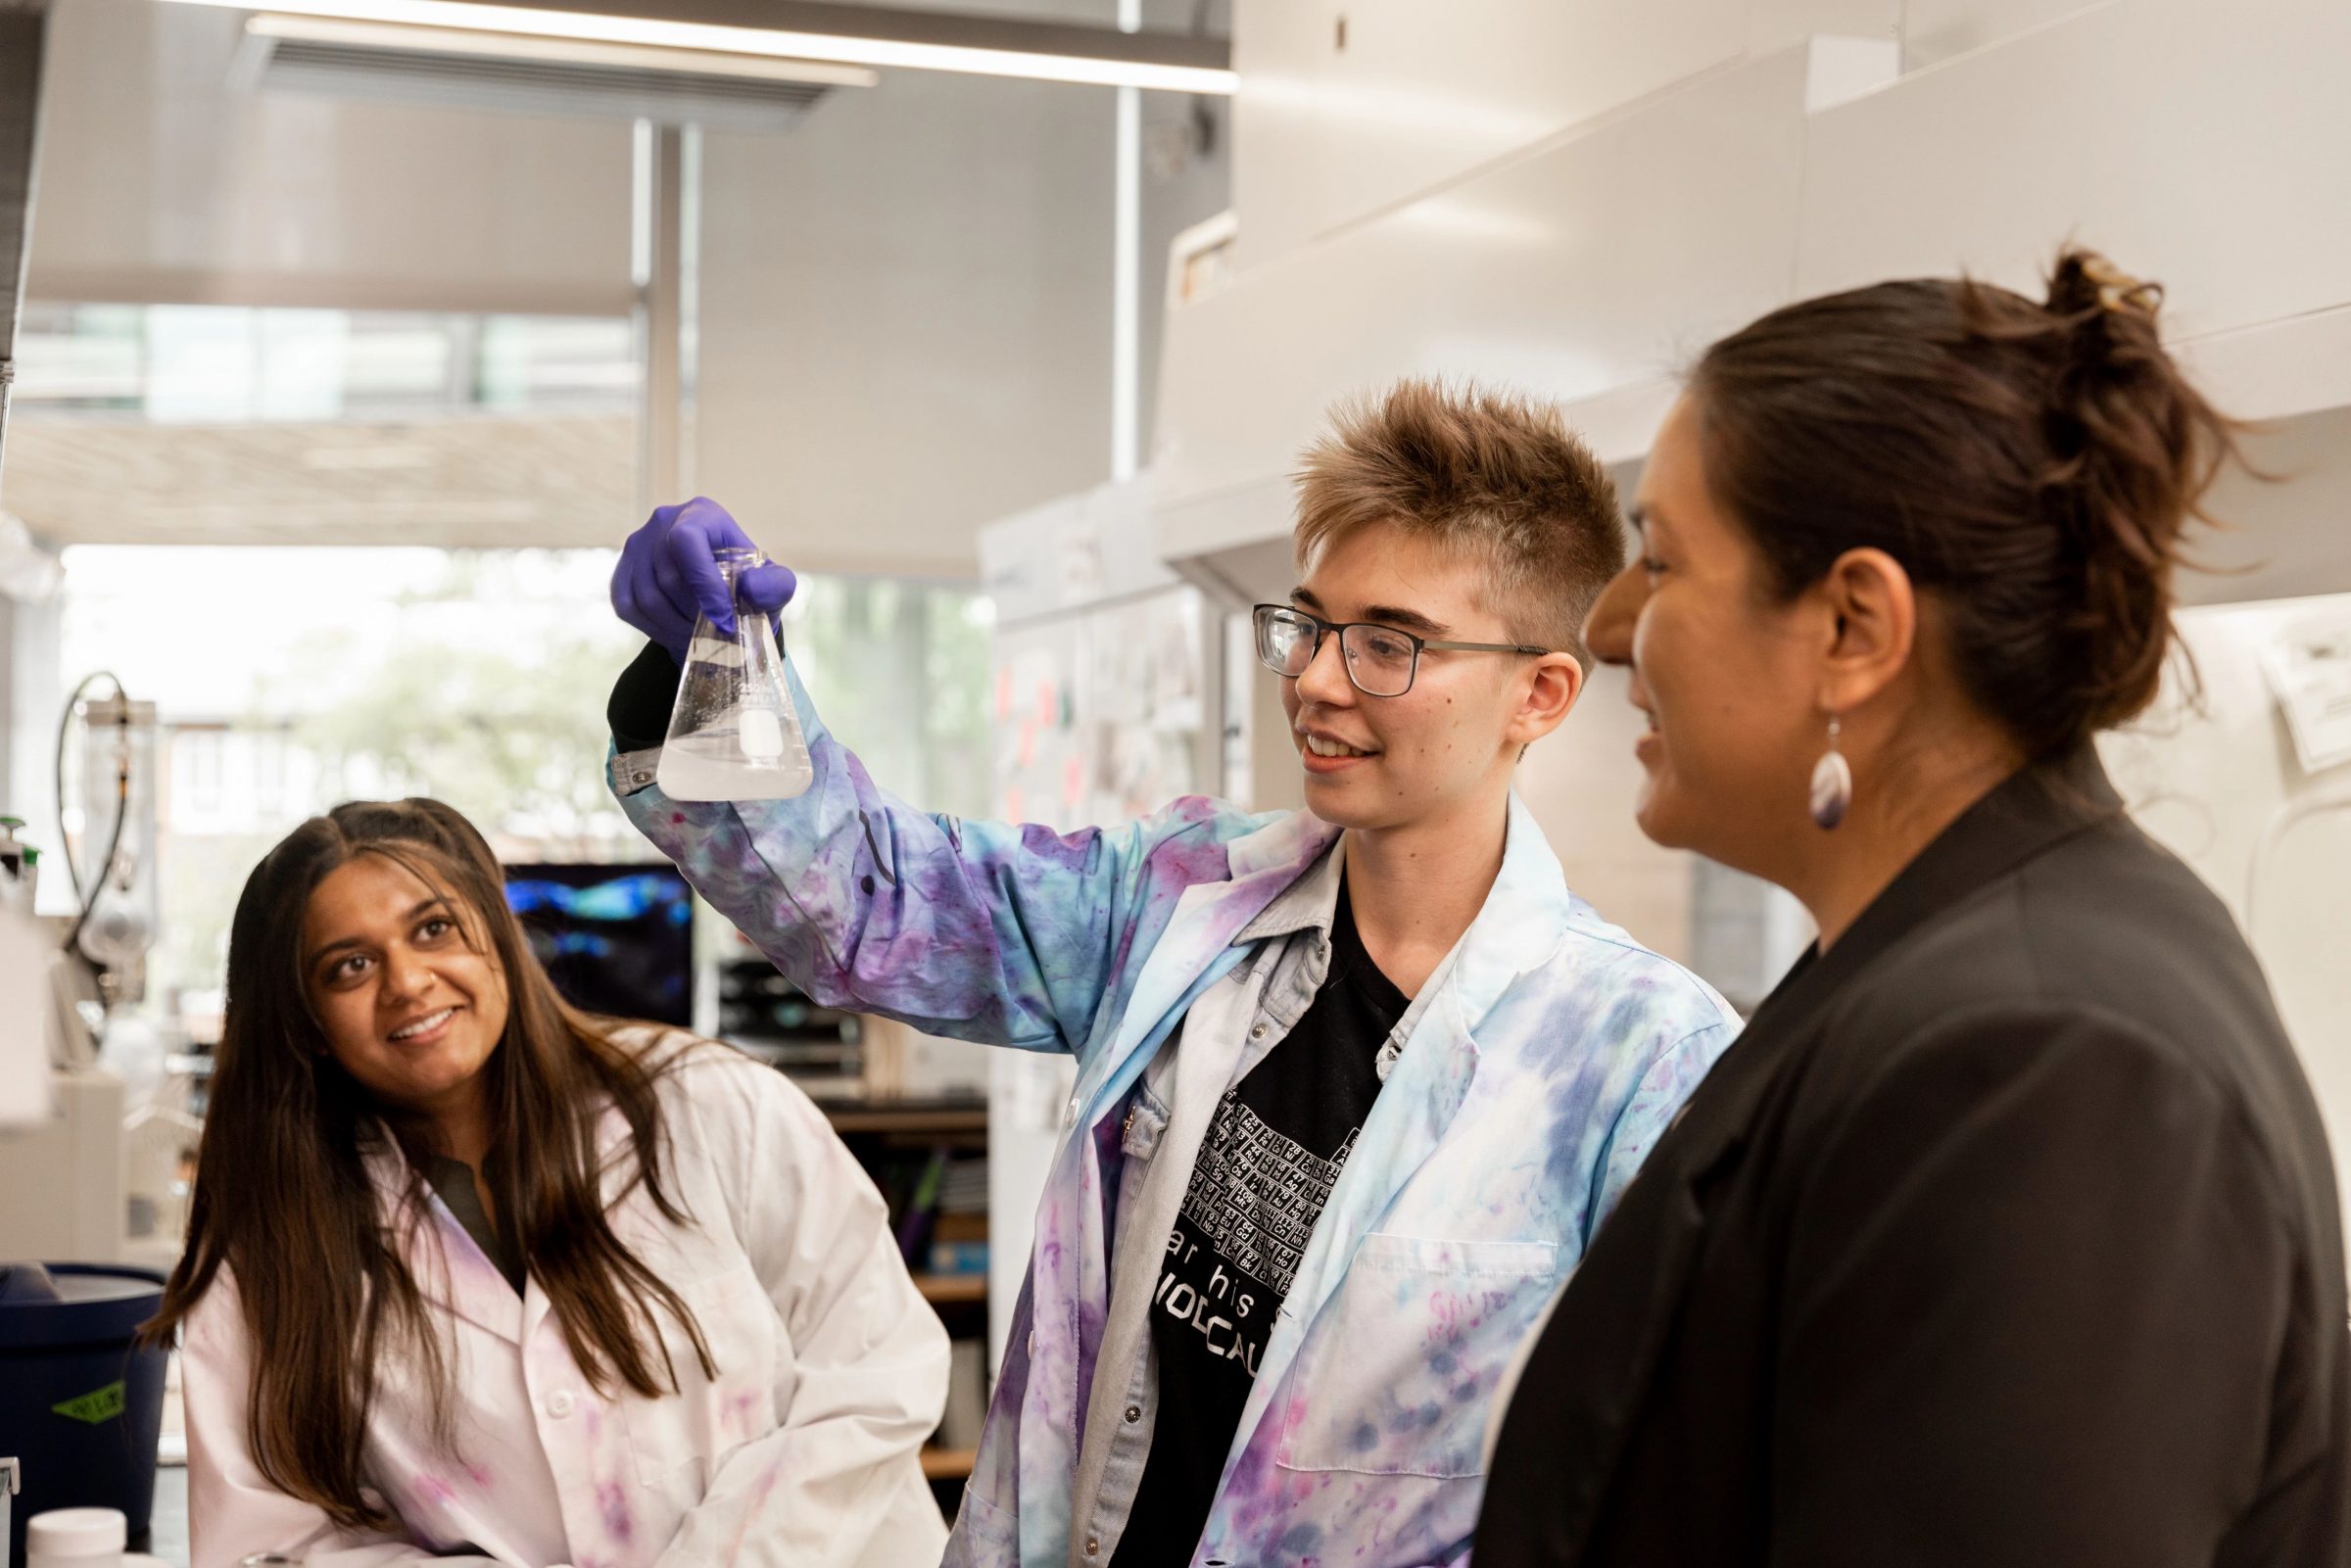 Professor Naomi Lee mentors two students as they conduct research in her lab.